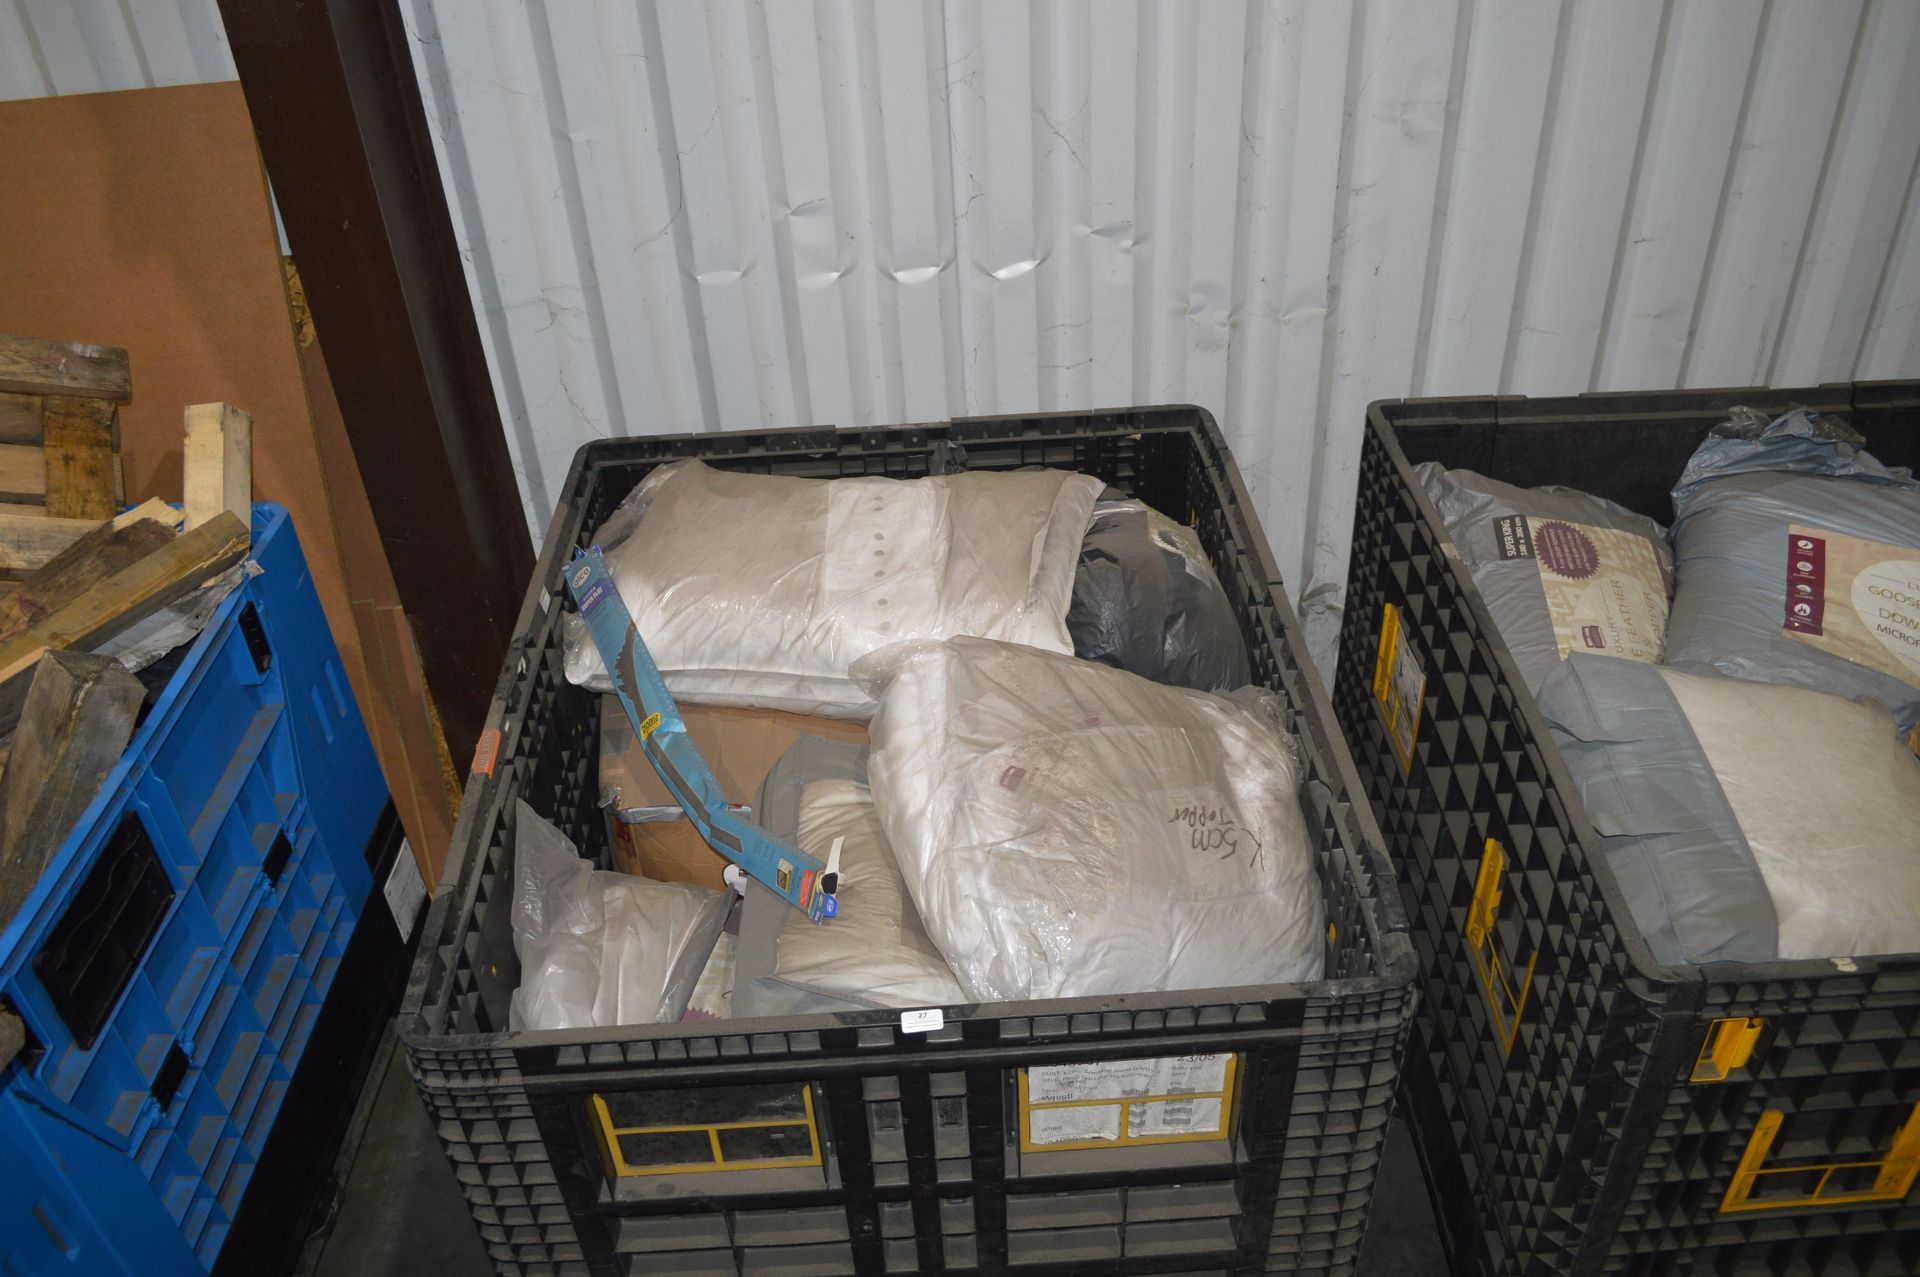 *Plastic Pallet Stillage Containing Assorted Mattress Toppers, Pillows, etc.